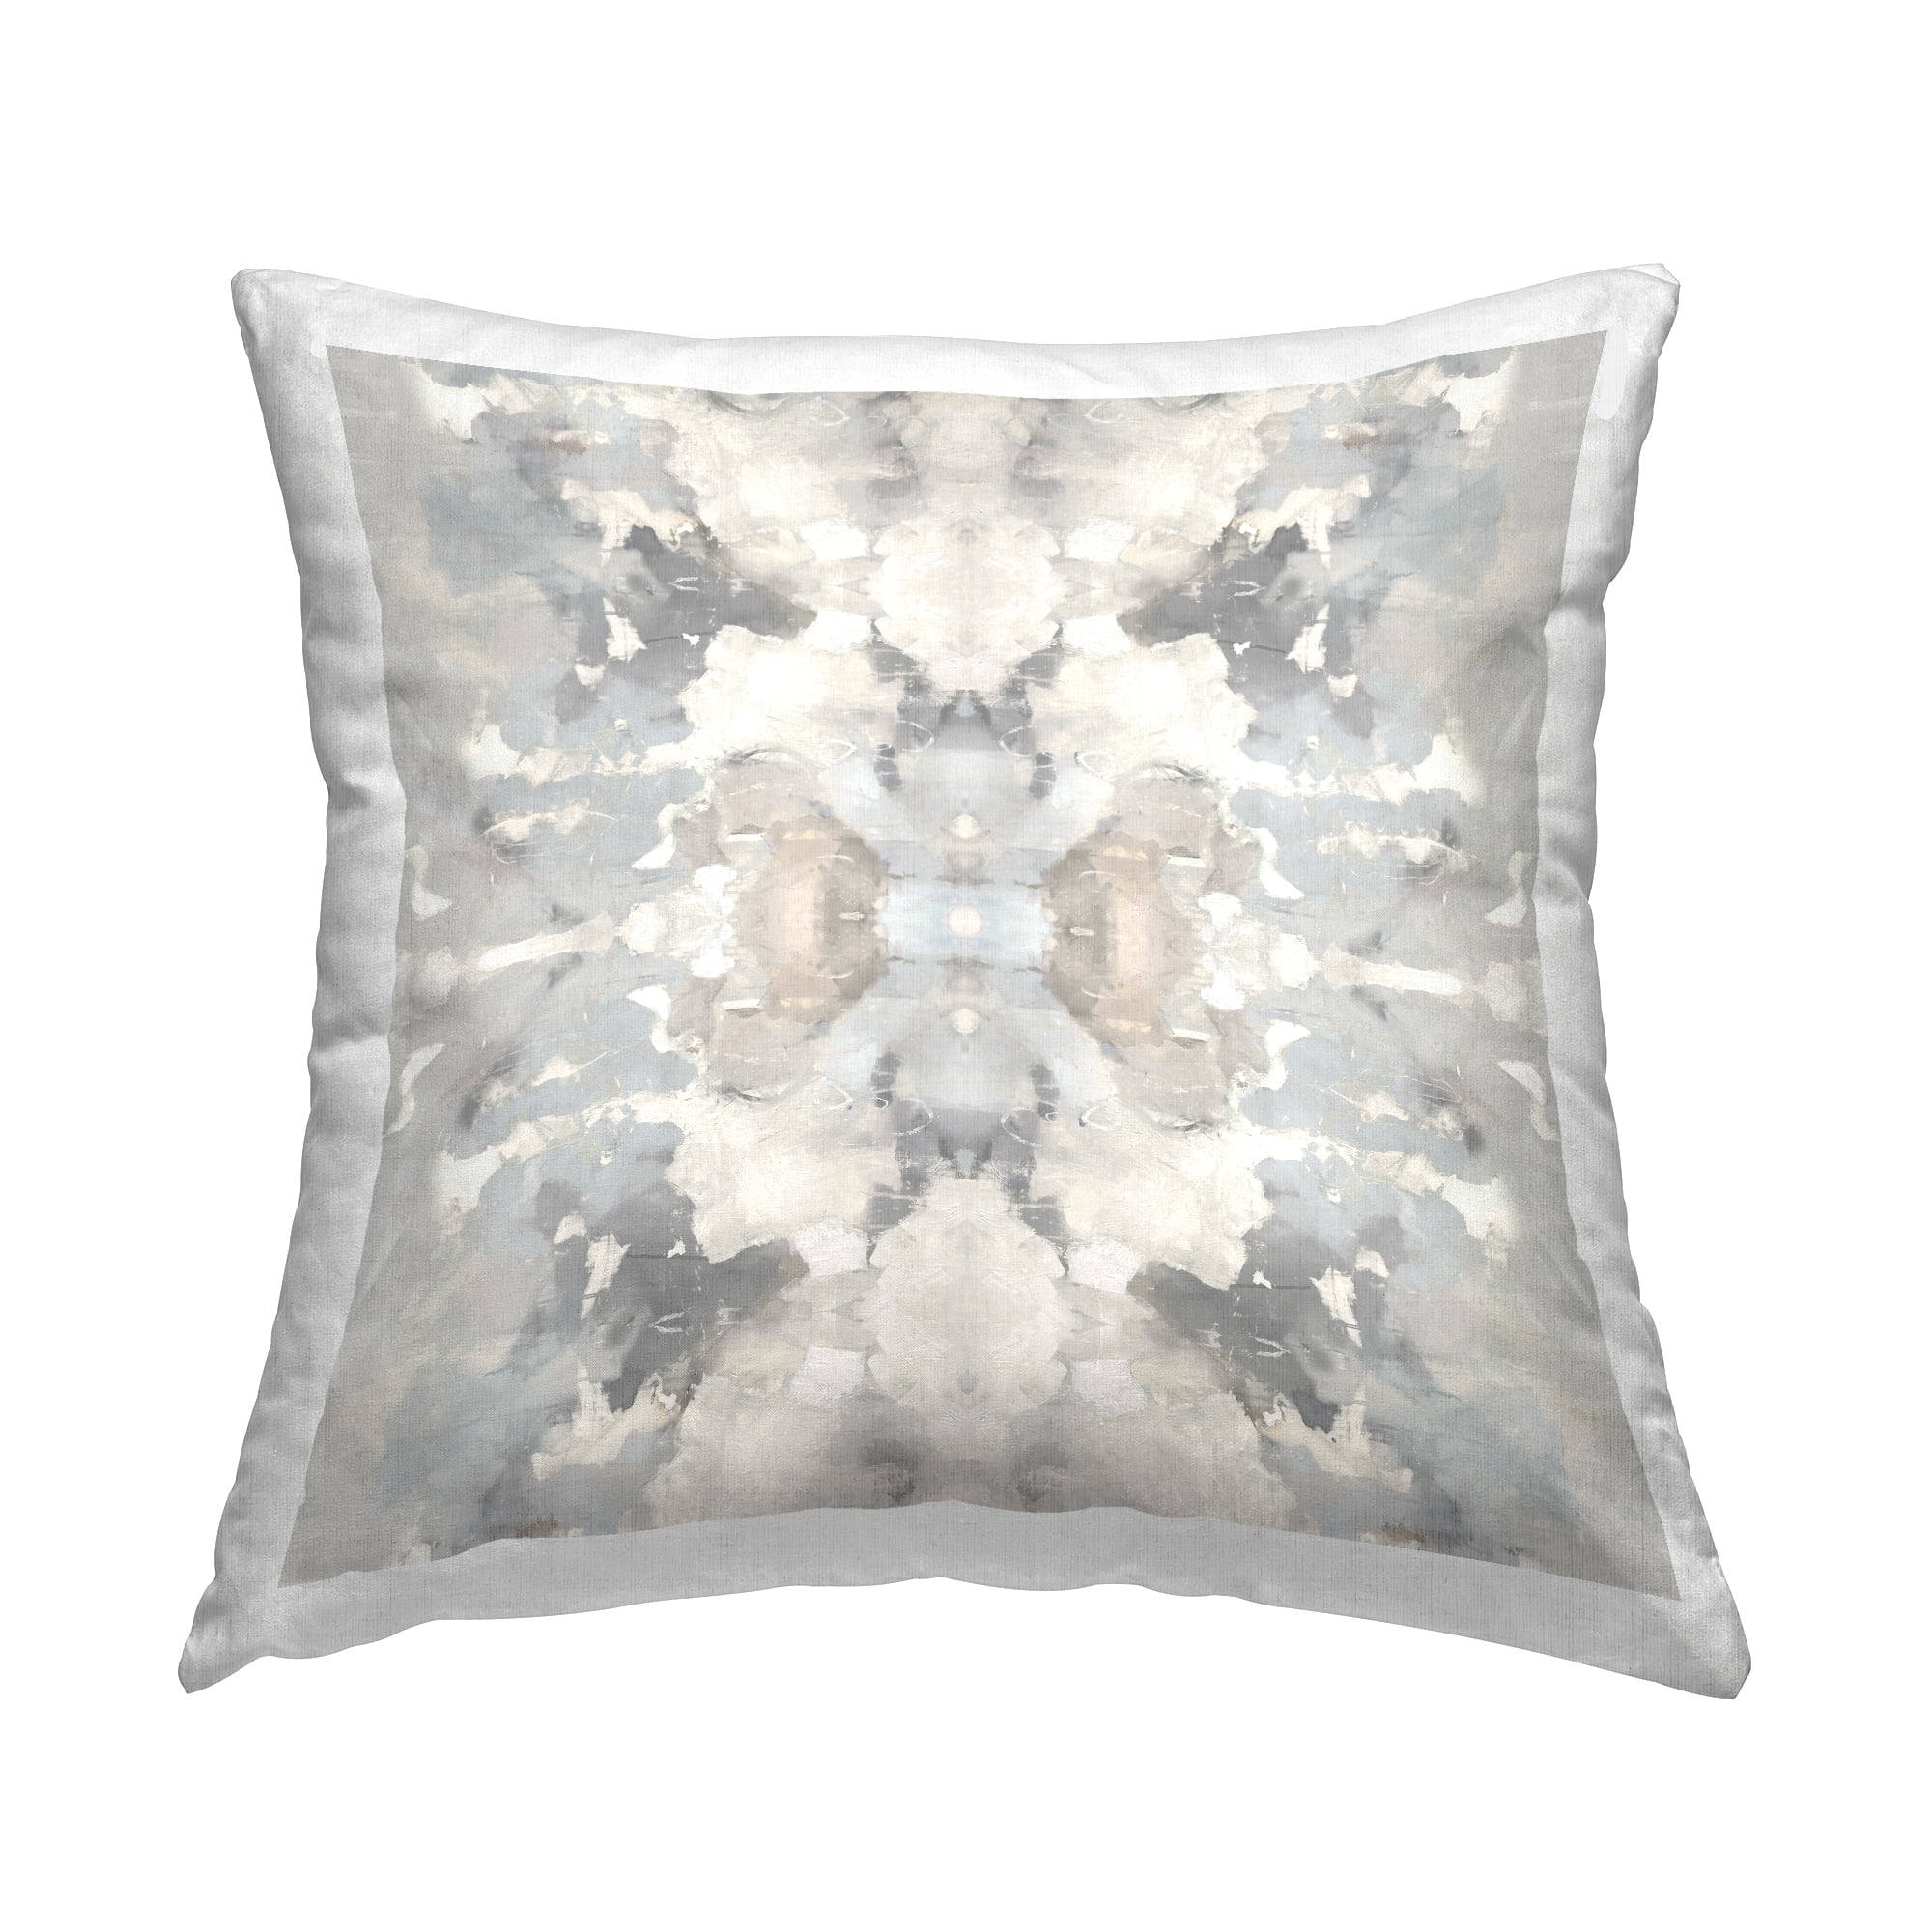 Stupell Industries Soft Muted Tones Pattern Printed Throw Pillow Design by  Ellie Roberts 